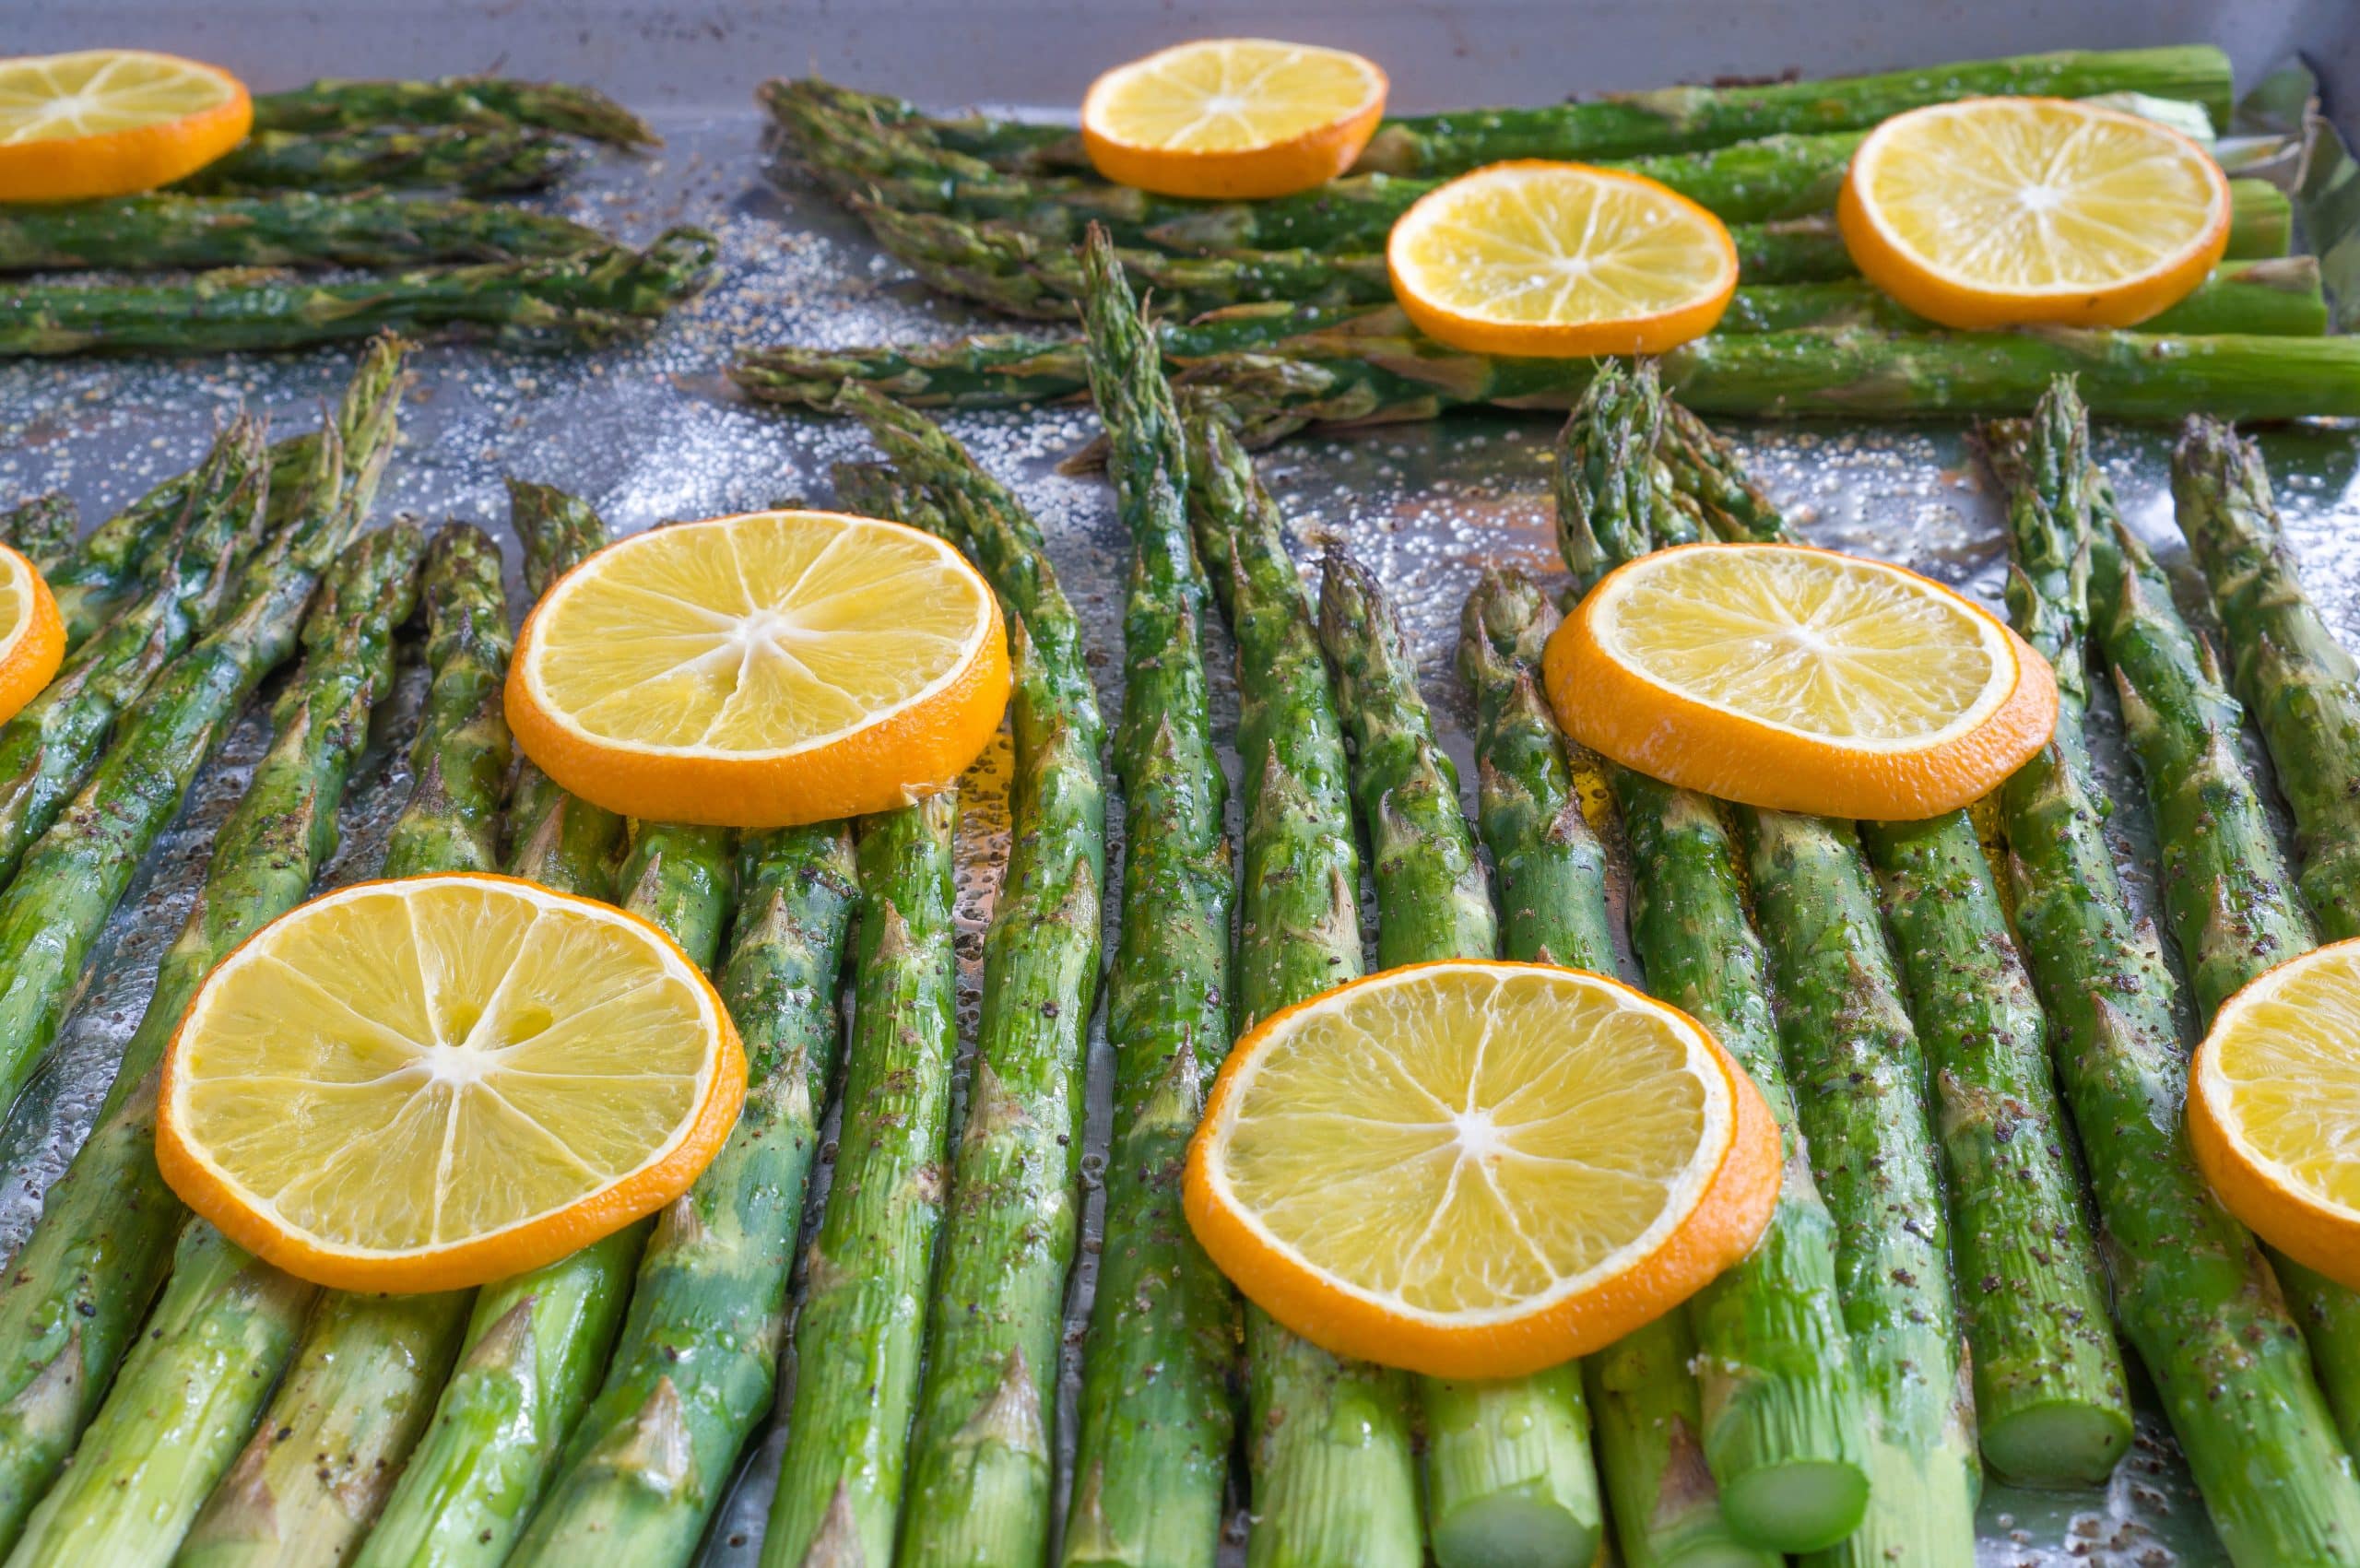 Baked Lemon Pepper Asparagus – Simple recipe for Baked Lemon Pepper Asparagus using fresh asparagus, extra virgin olive oil, salt, pepper, and fresh lemon slices. All you need is a hot oven, 5 ingredients, a sheet pan, and 20 minutes. We love making this part of our healthy weekly meal prep! Gluten free, vegan, & paleo-friendly. ♥ | freeyourfork.com